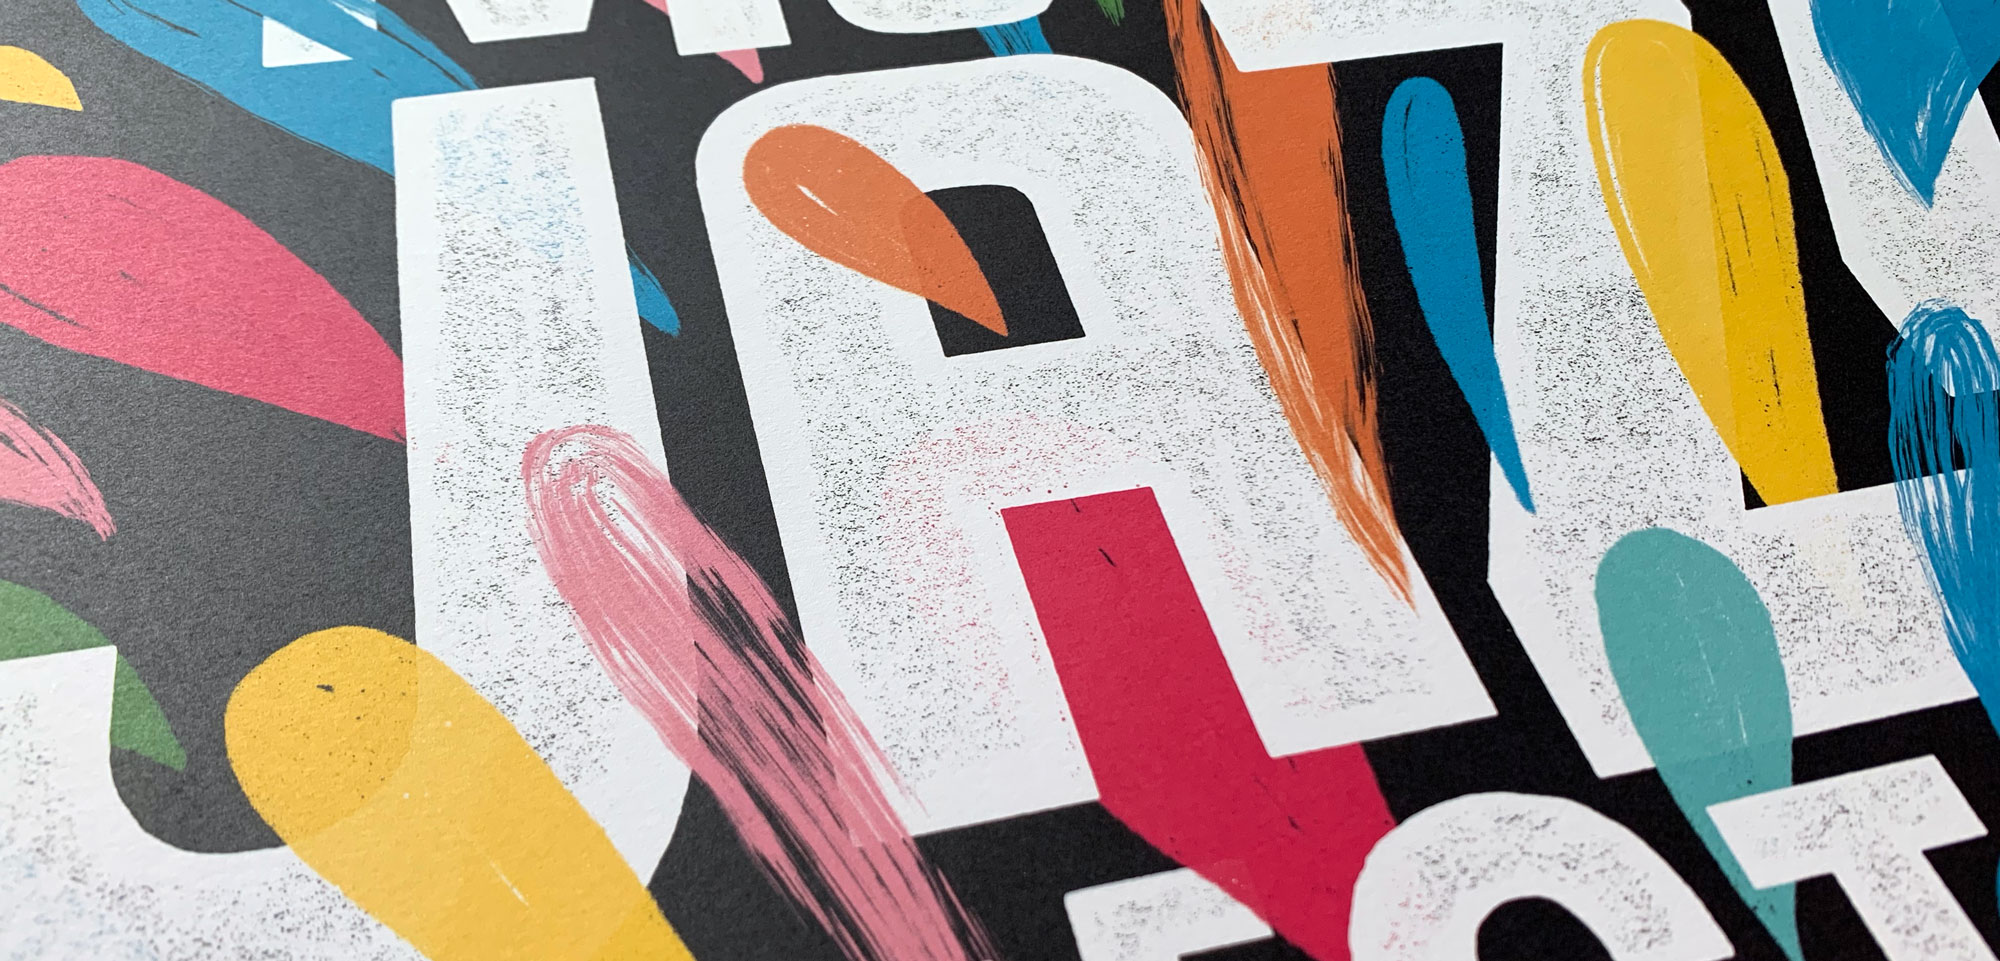 A close up of the letters on a poster